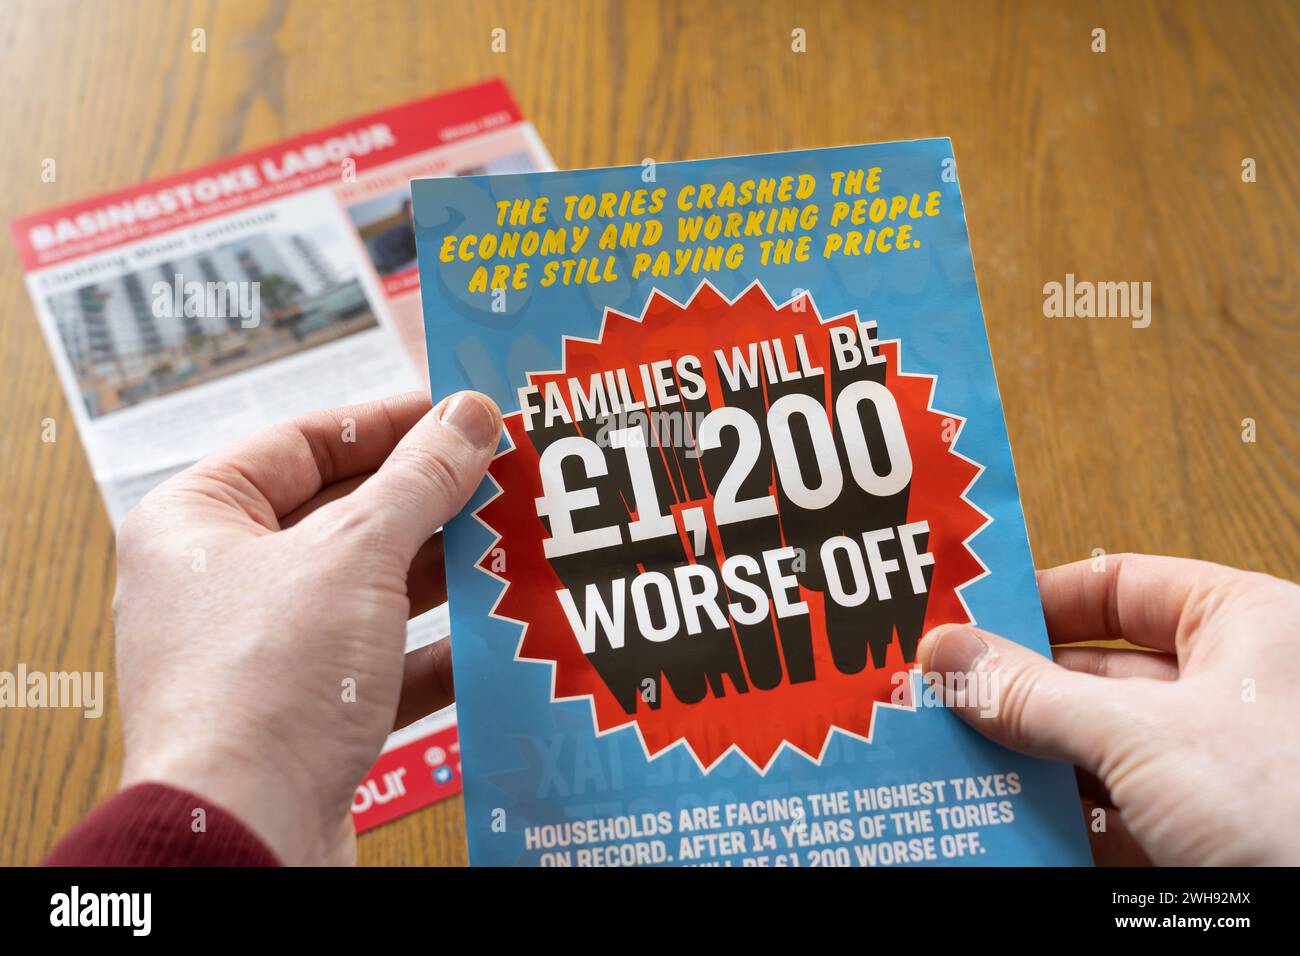 A man's hand holding a flyer from the Labour party in Basingstoke, stating that families are £1,200 worse off since the Tories crashed the economy. UK Stock Photo